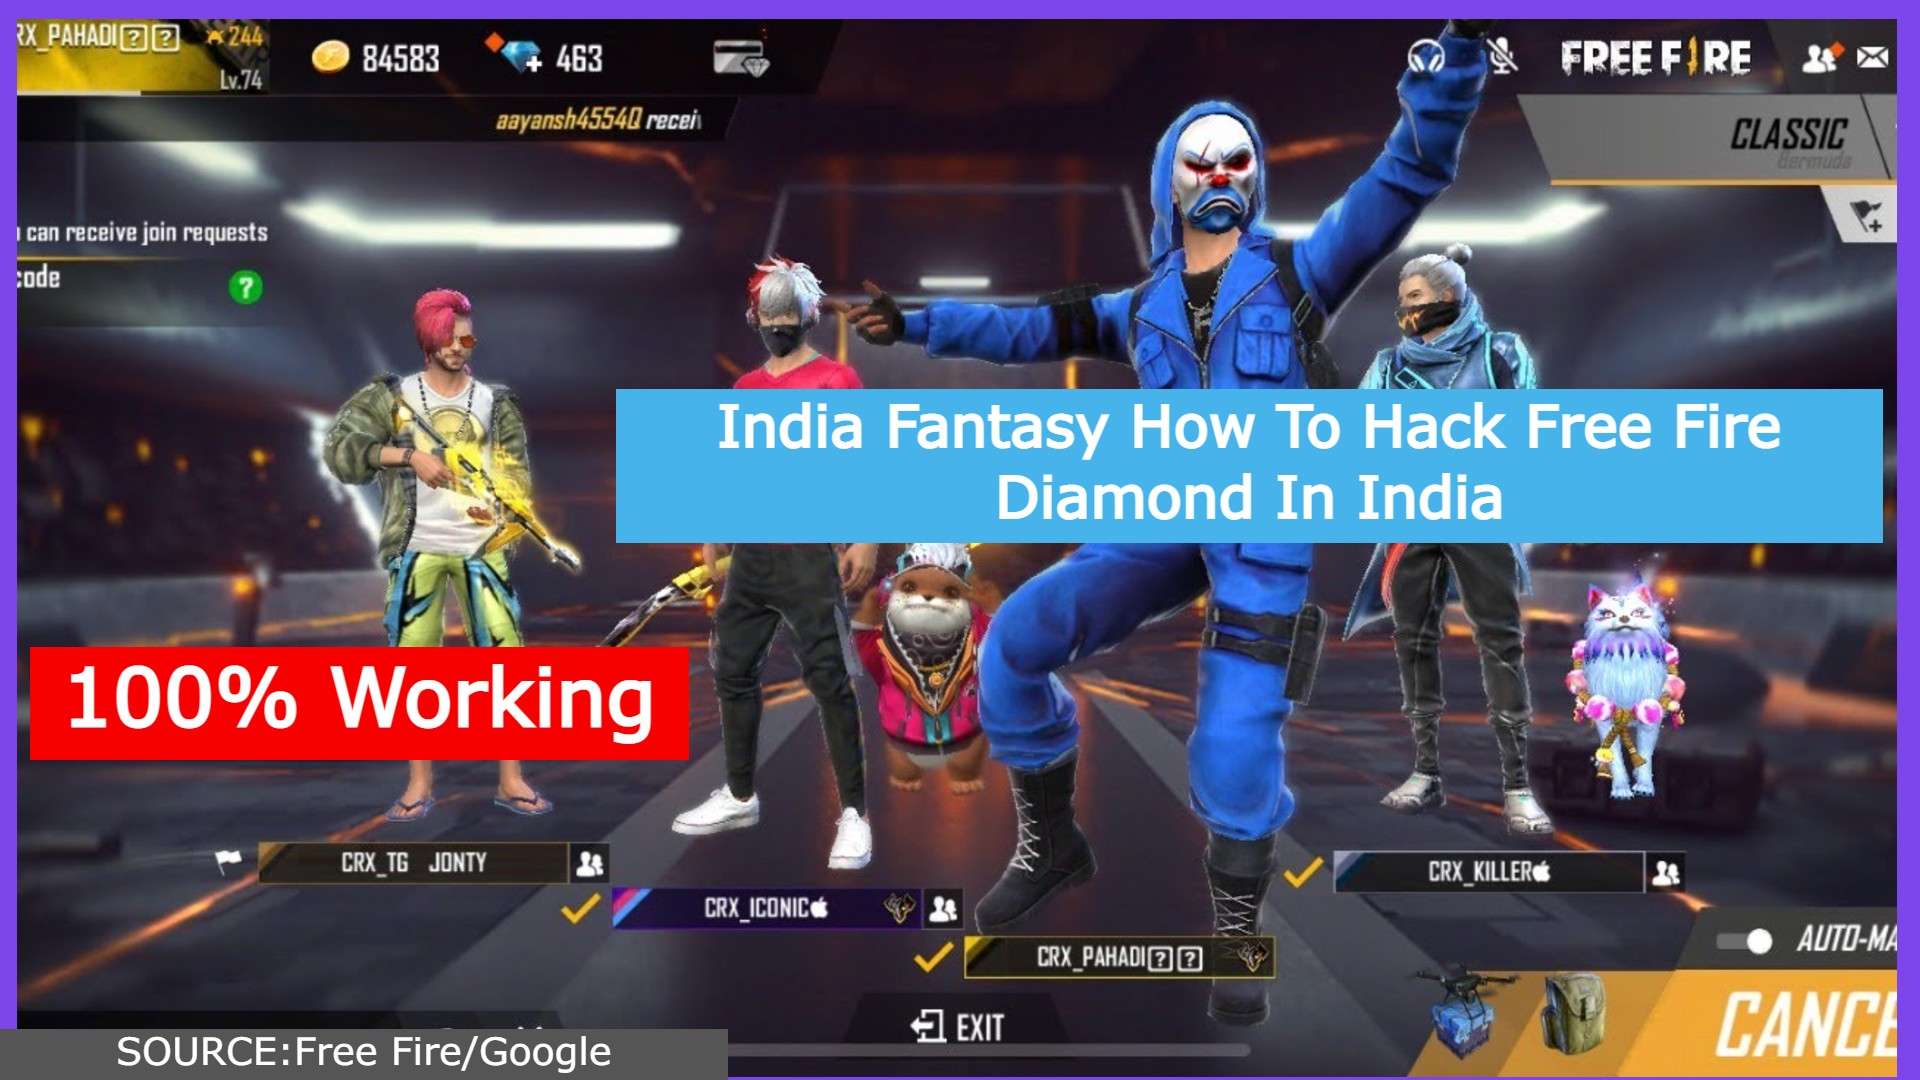 India Fantasy How To Hack Free Fire Diamond In India